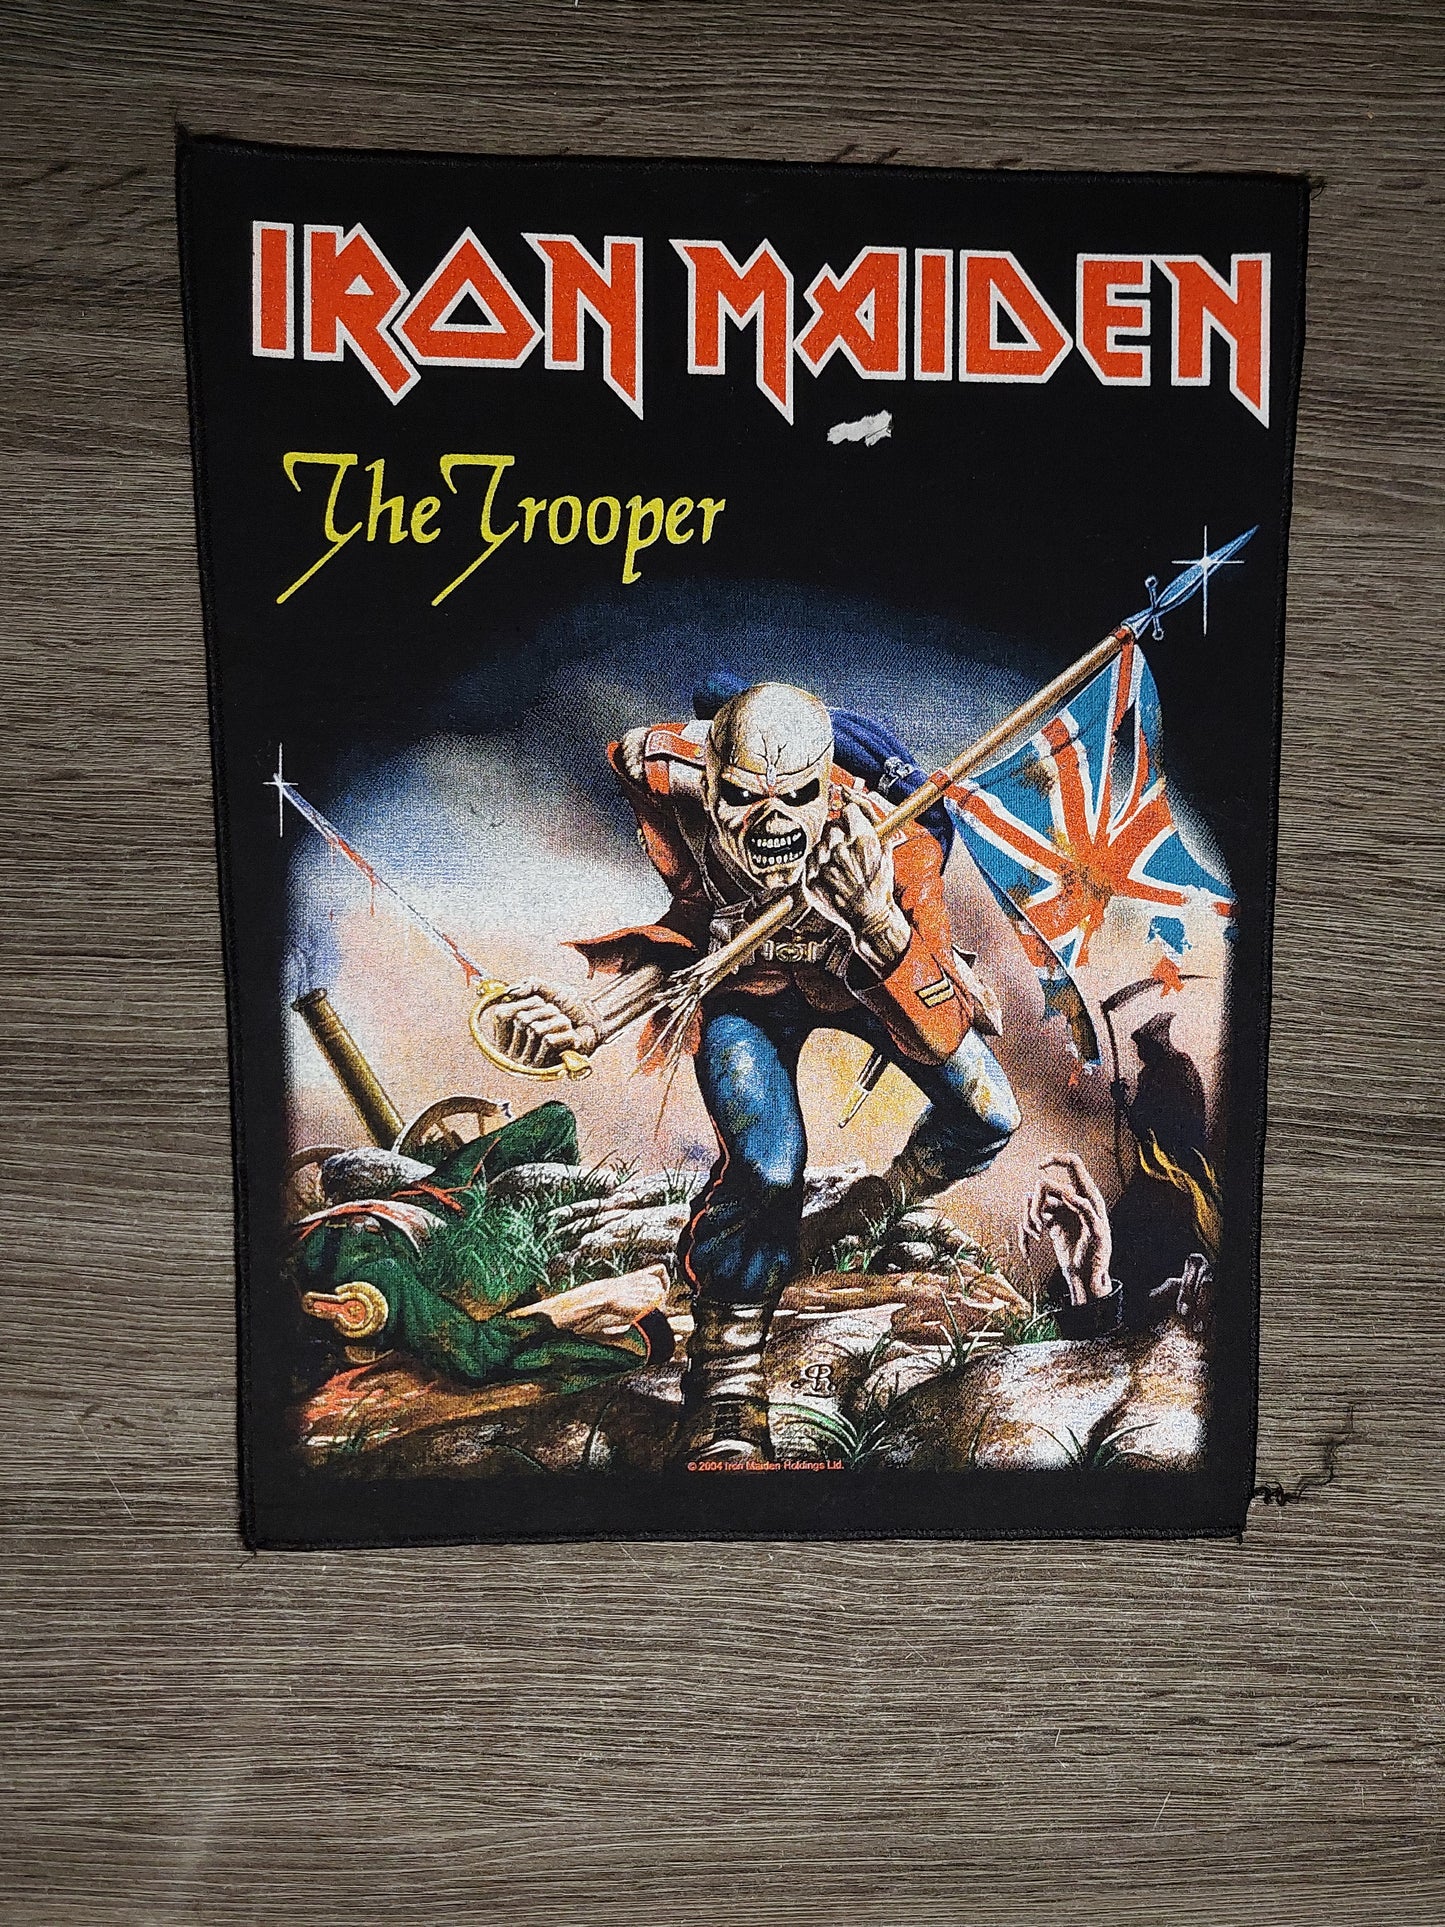 Iron maiden - The trooper backpatch